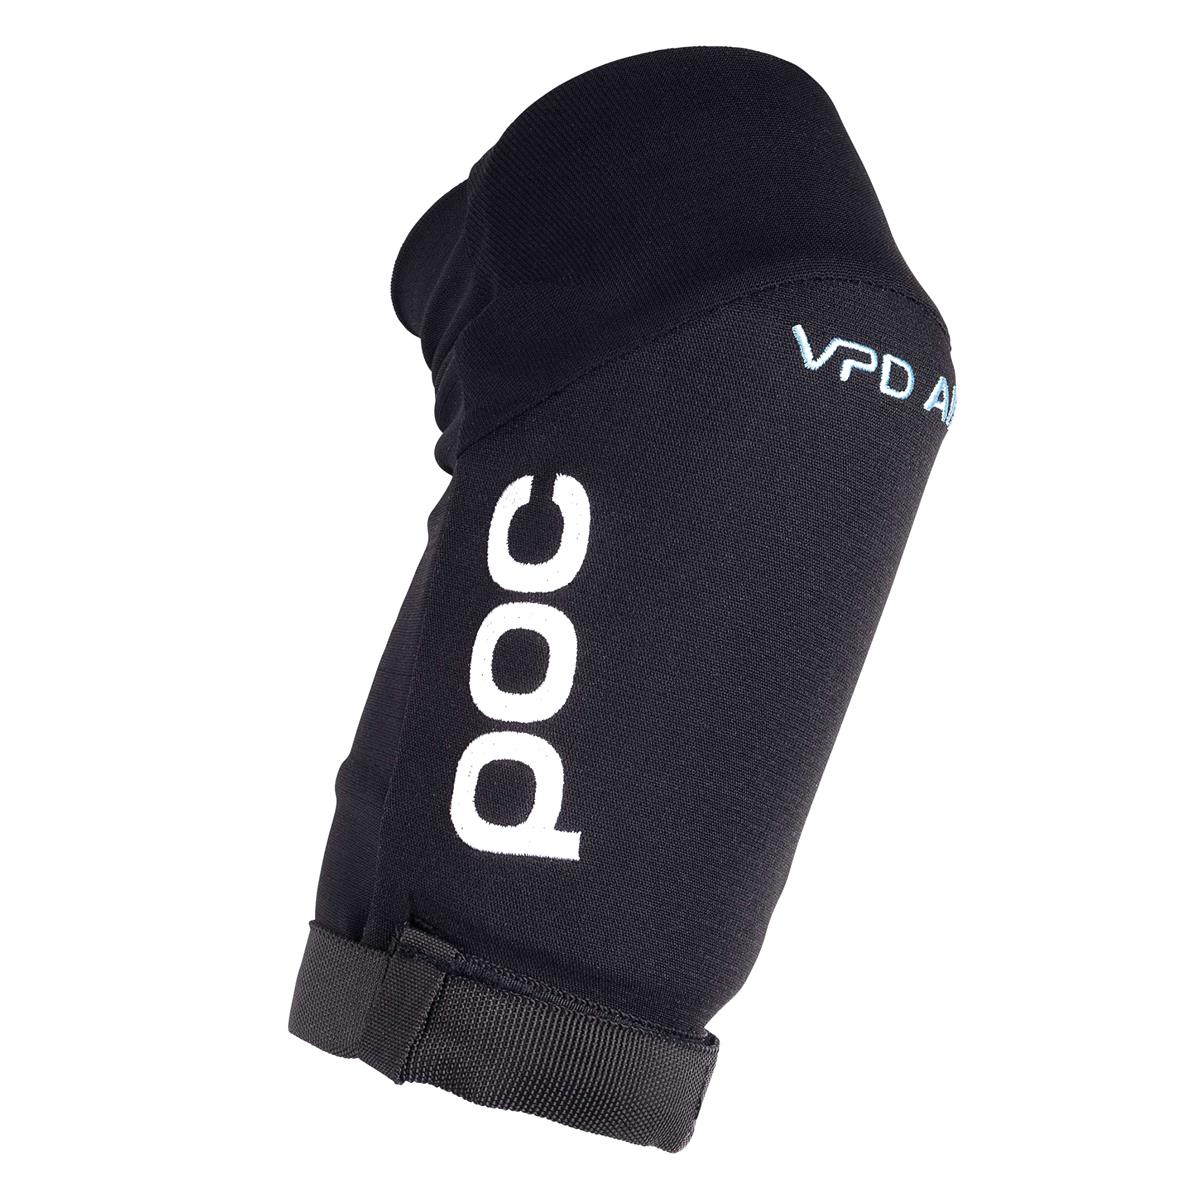 Joint VPD Air Elbow pads black Size M